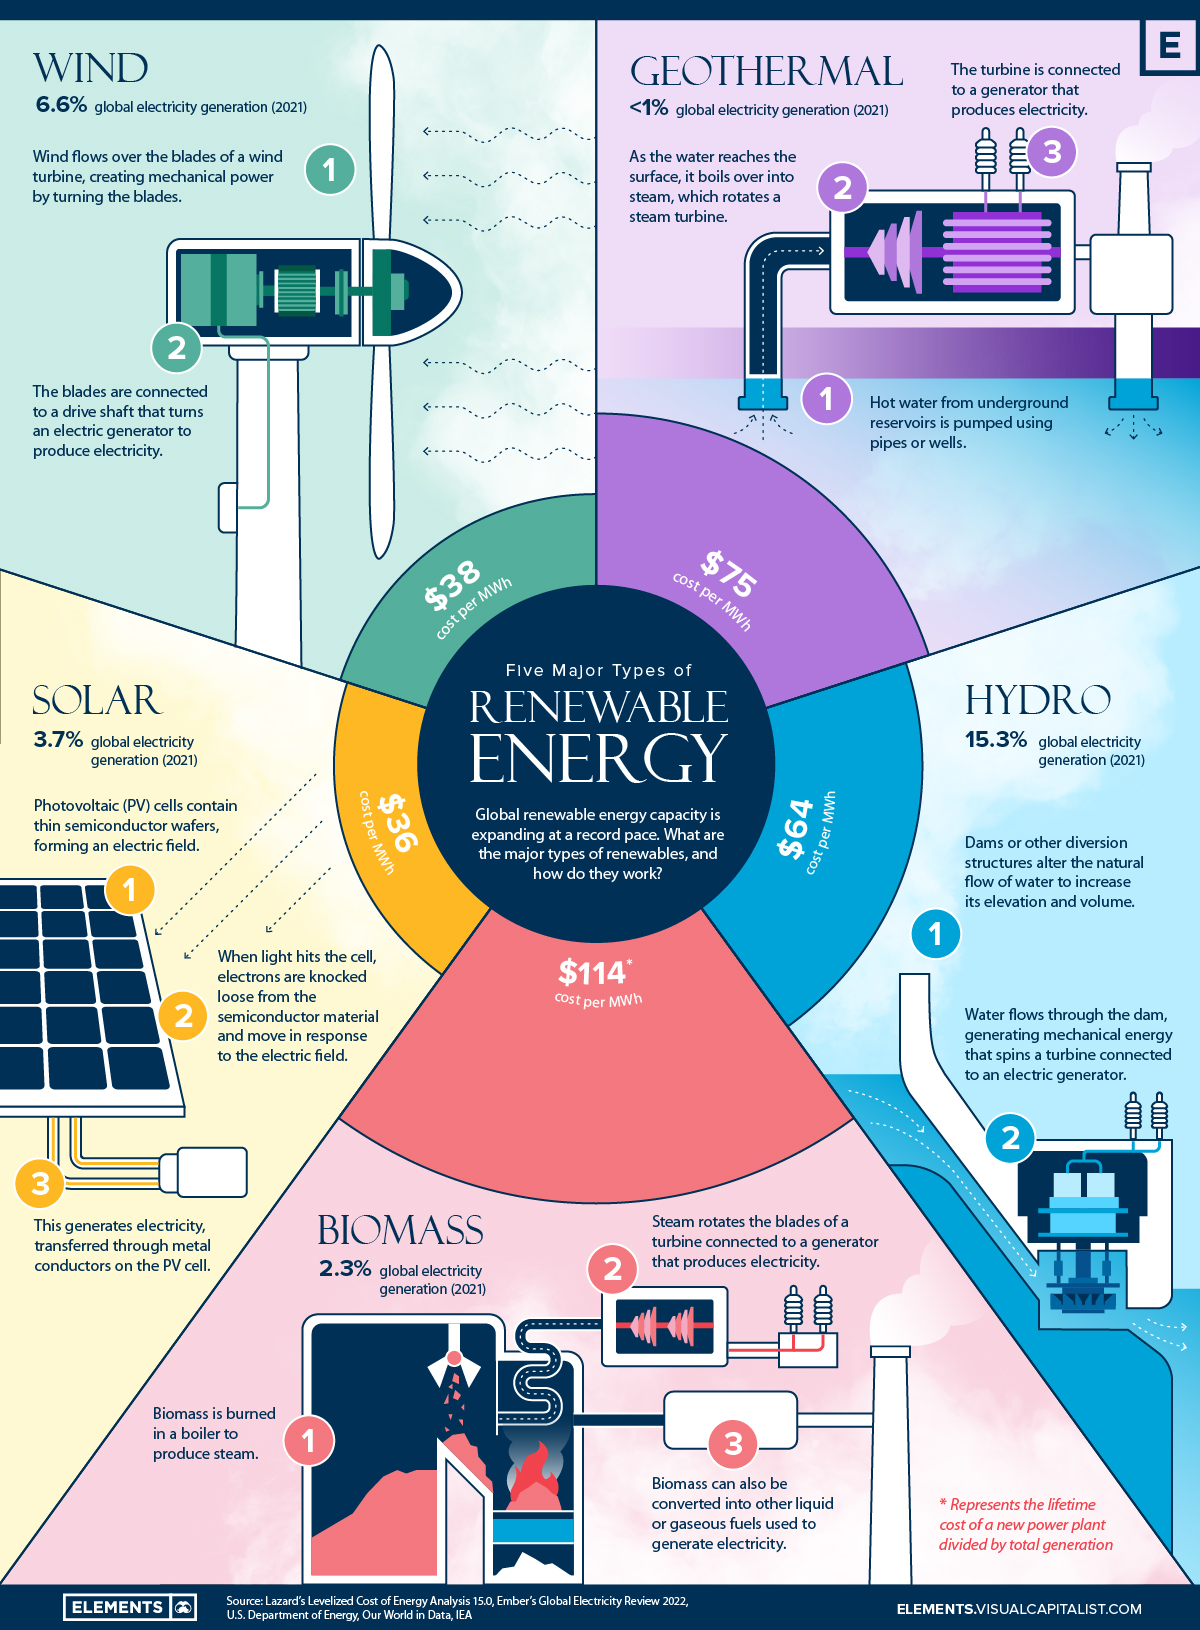 What Are the Five Major Types of Renewable Energy?